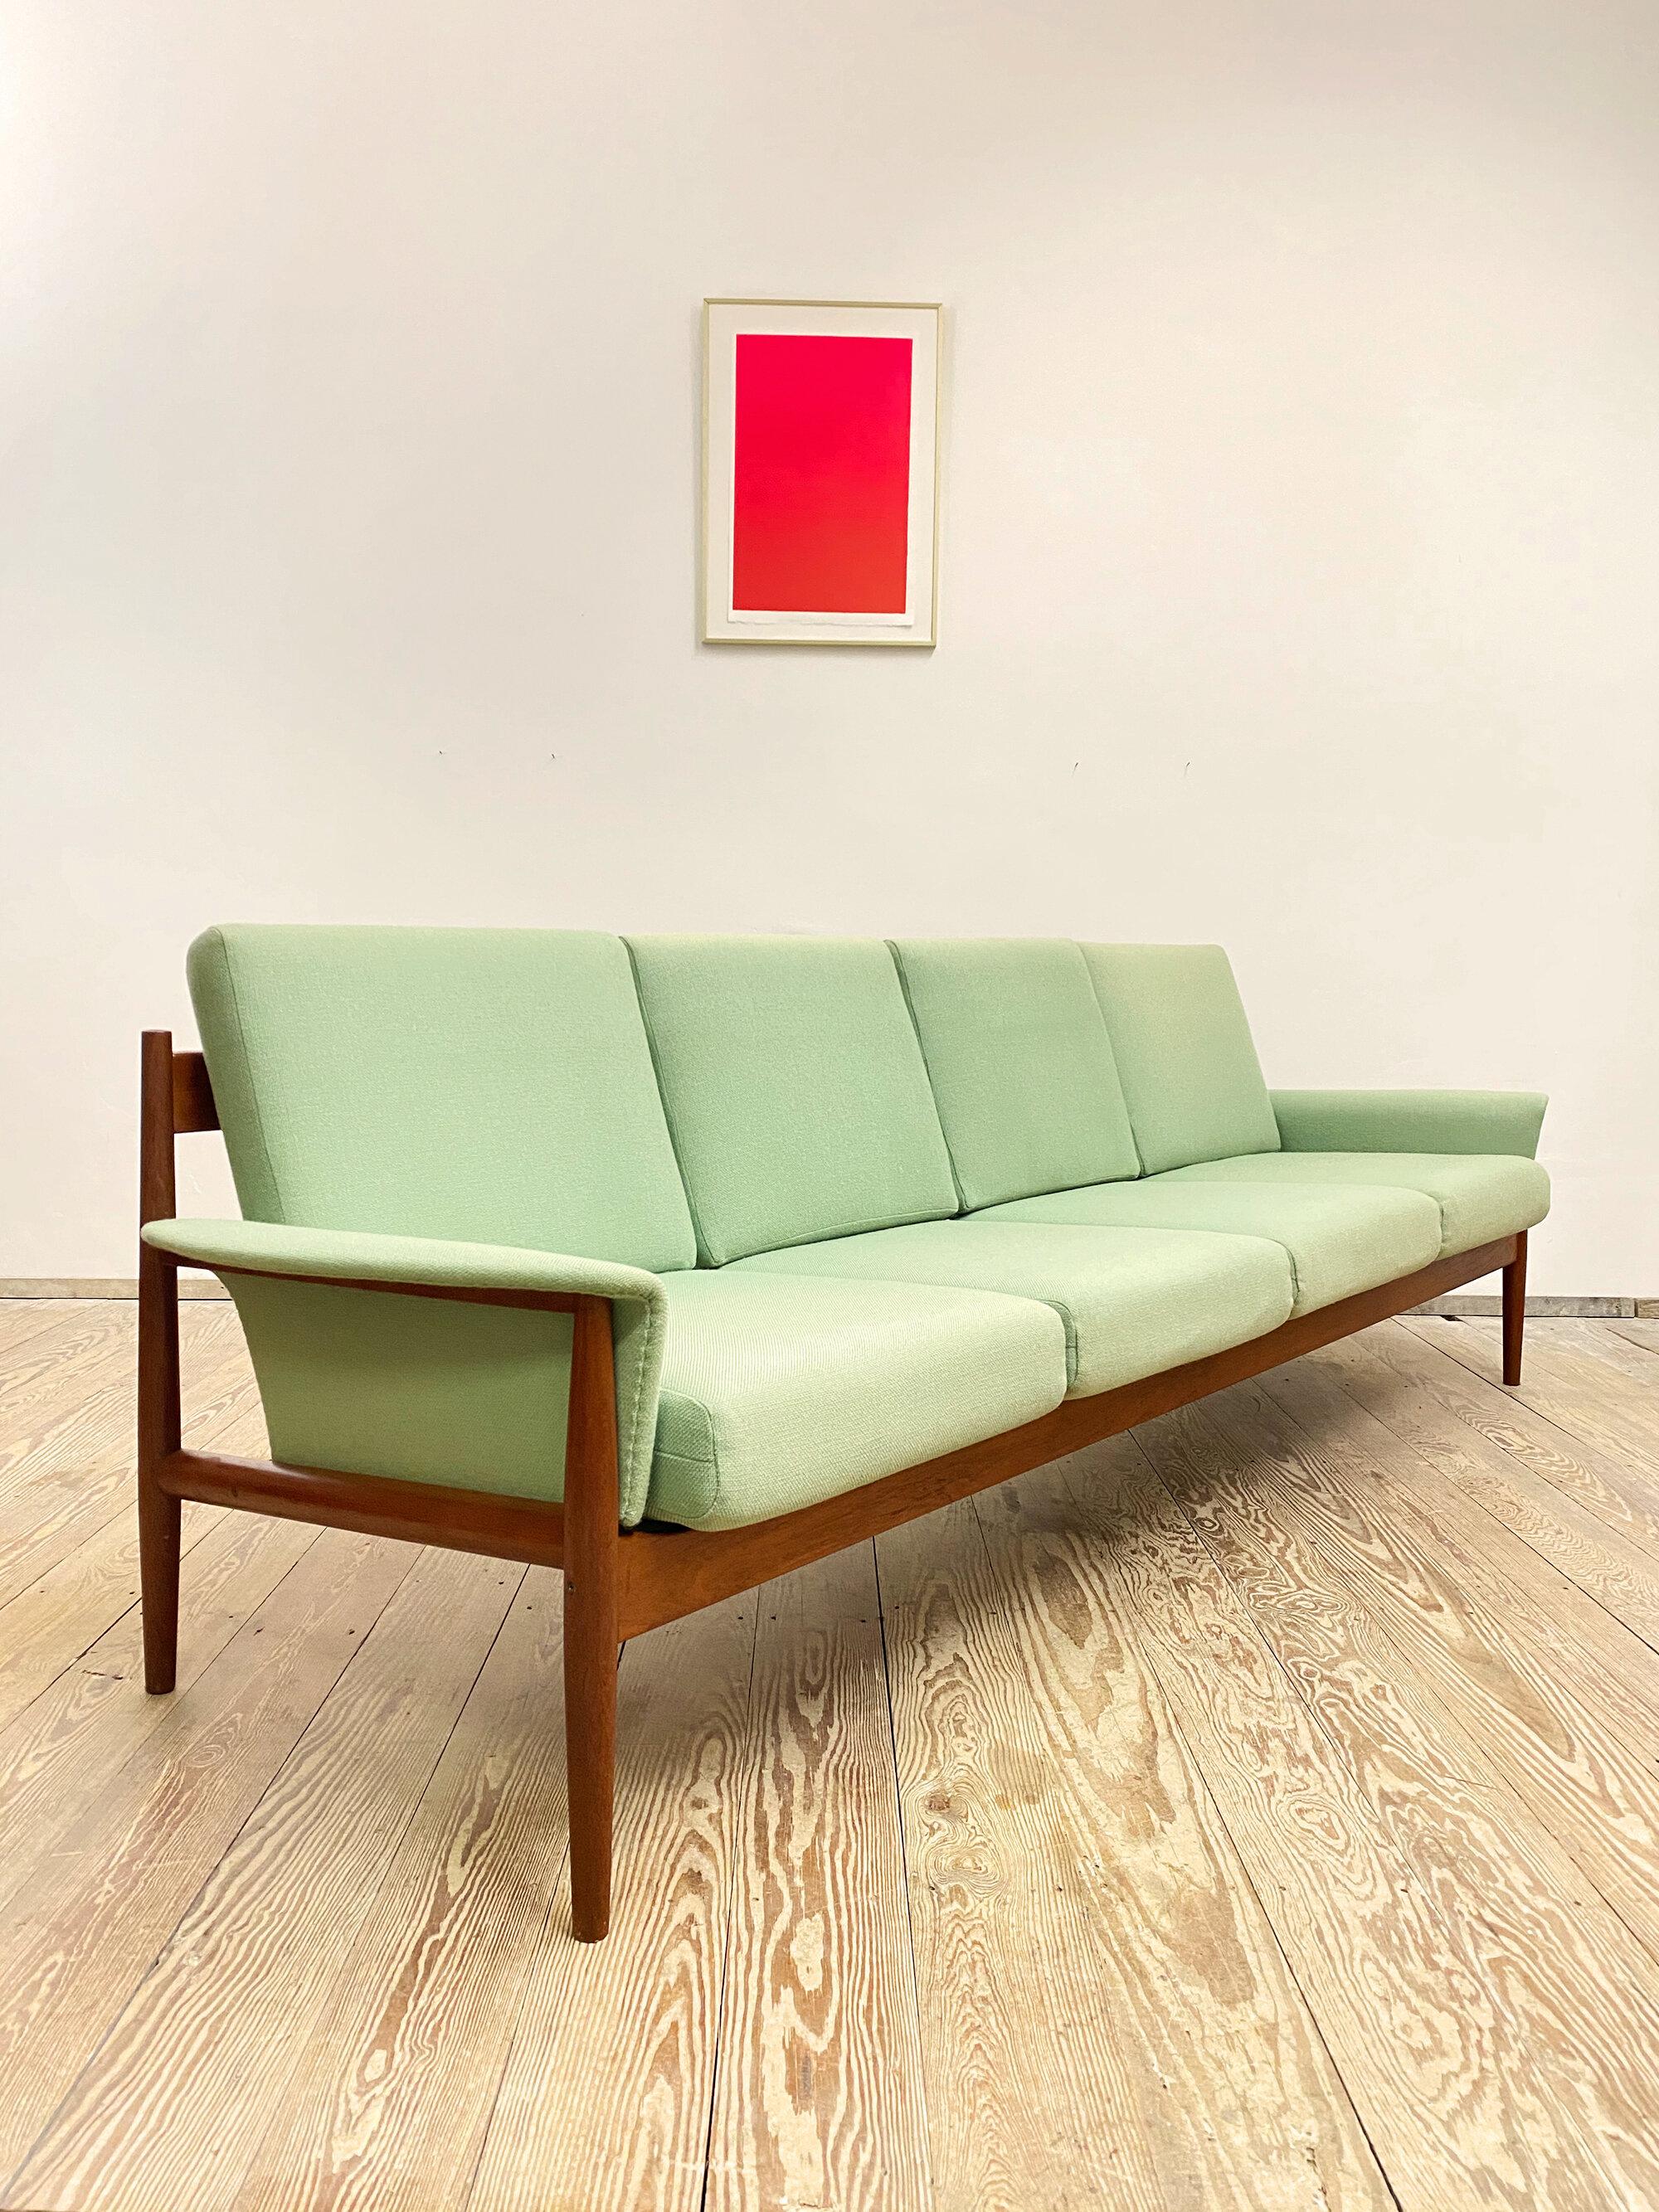 Dimensions 250 x 75 x 78 x 44 cm (W x D x H x SH) 

This shapely and comfortable sofa was designed by Danish Designer and Architect Grete Jalk for France and Son. This very rare four-seat sofa comes in a version made of solid teak wood with more